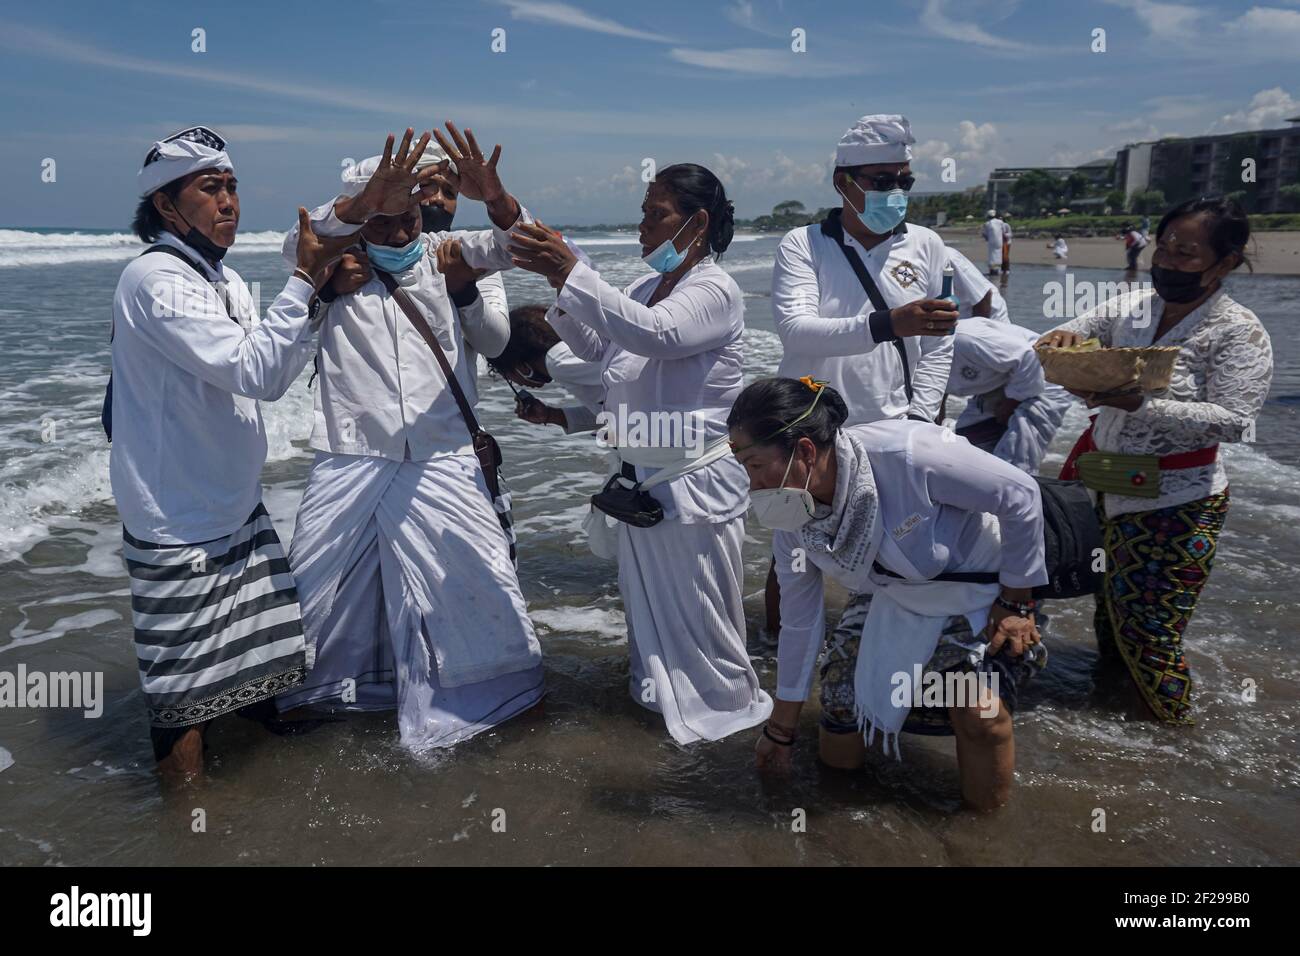 Badung, Bali, Indonesia. 10th Mar, 2021. A devotee seen as he trance during the event. Balinese Hindu to celebrate Melasti, a soul-cleansing ceremony at Petitenget Beach before Nyepi, the Day of Silence, holiday. Nyepi will be held on March 14, 2021, which marks New Year in Balinese calendar. By the Covid-19 outbreak, Melasti this year only limited for few selected people. In the normal condition there are thousands of them. (Credit Image: © Dicky BisinglasiZUMA Wire) Stock Photo